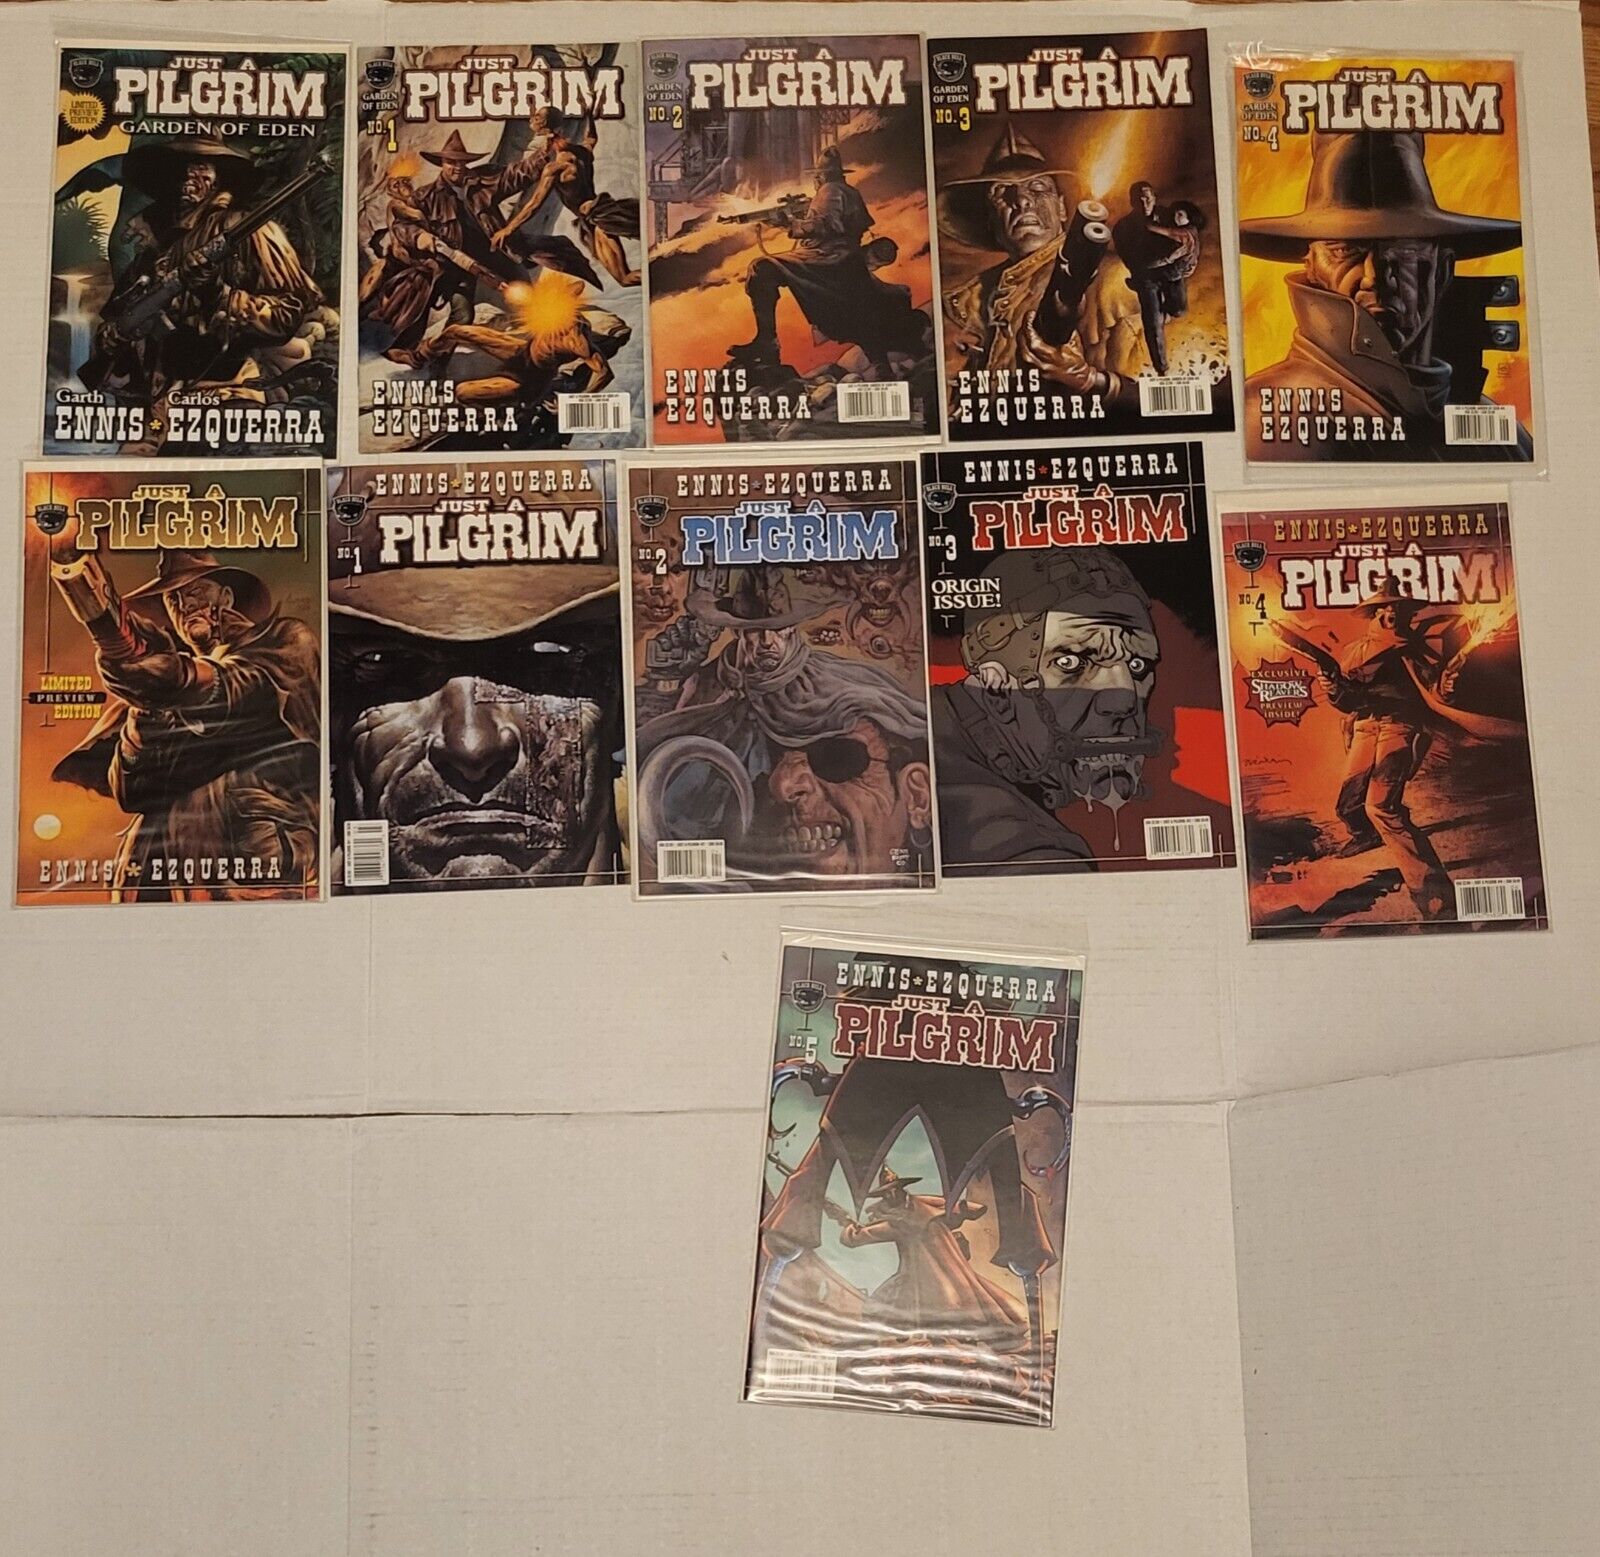 JUST A PILGRIM #1-5 / GARDEN OF EDEN #1-4  Plus PREVIEW ISSUES